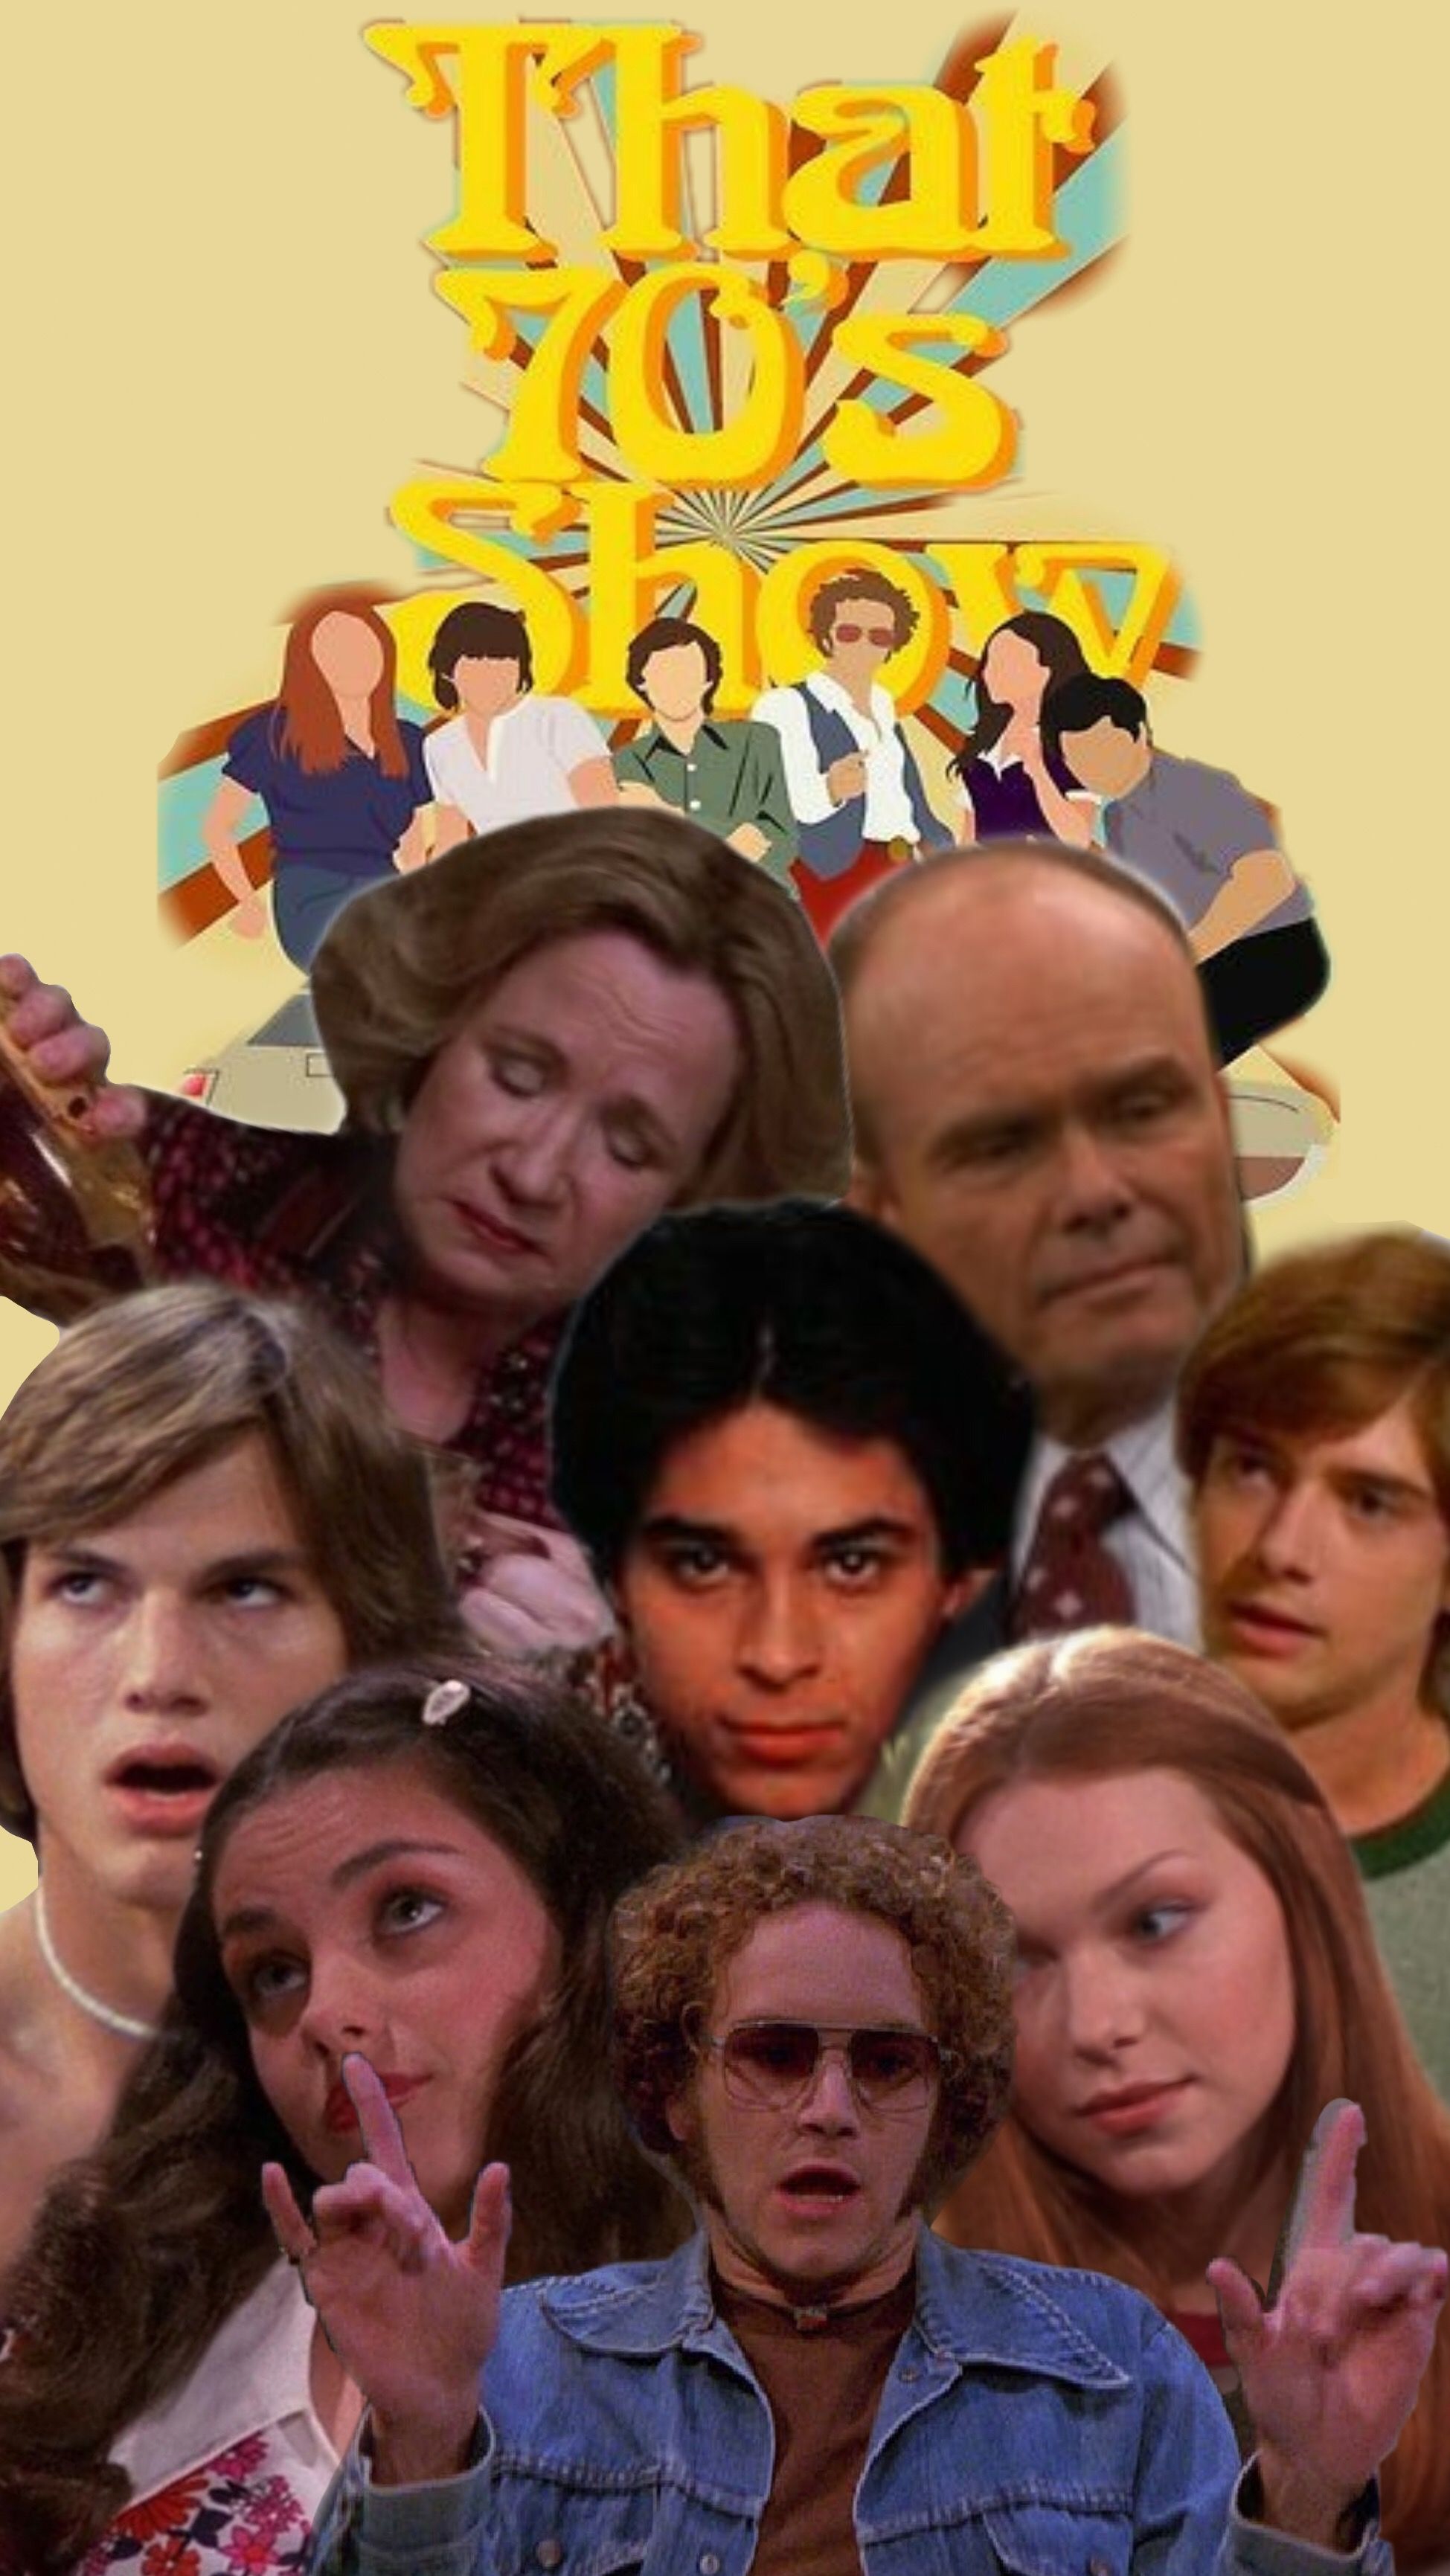 That 70s show poster with many characters - 70s